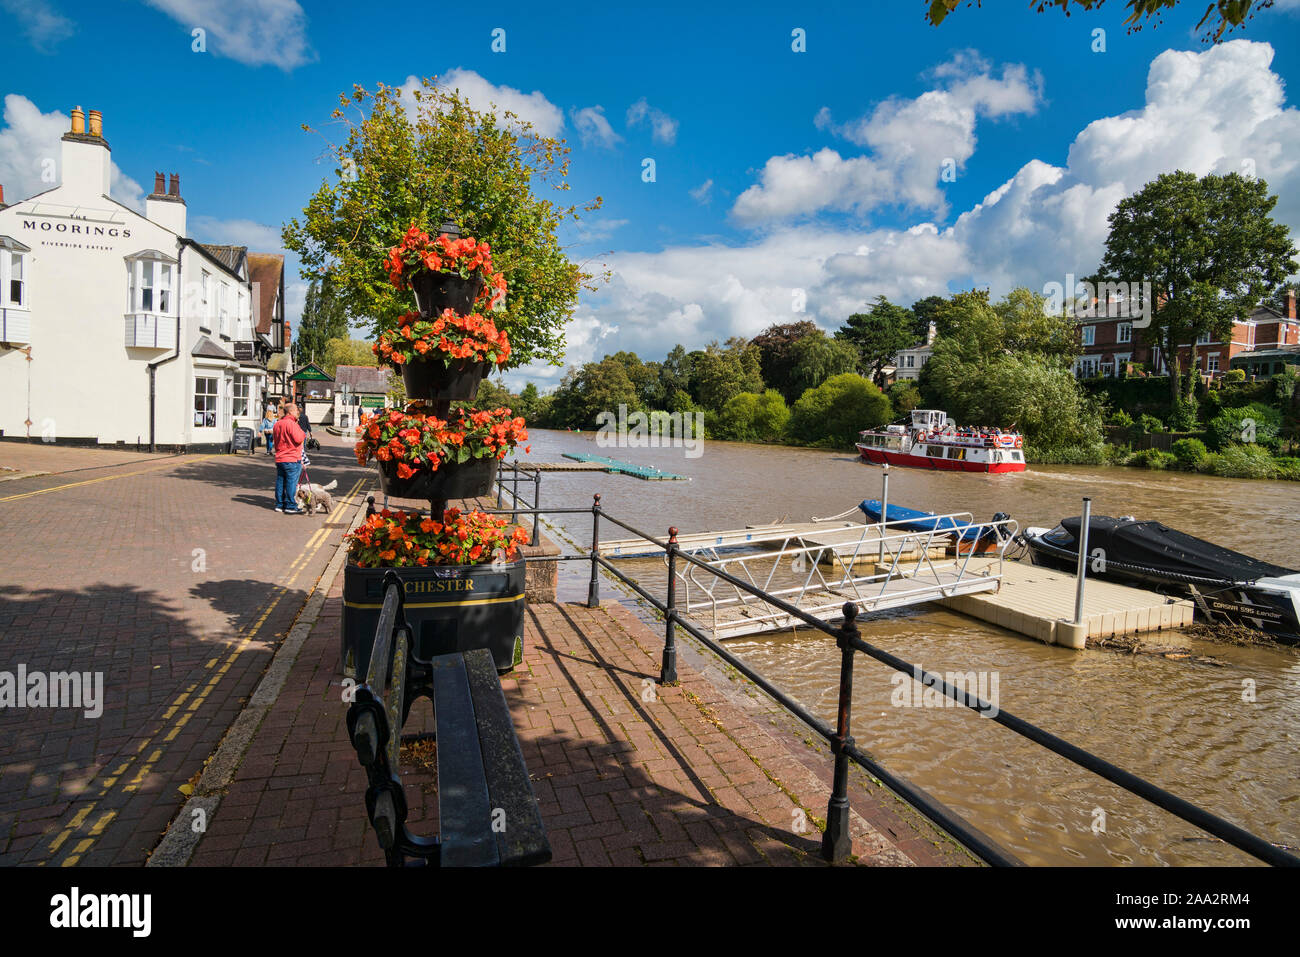 Chester city,  flower displays,  River Dee,  sunny, England, UK Stock Photo